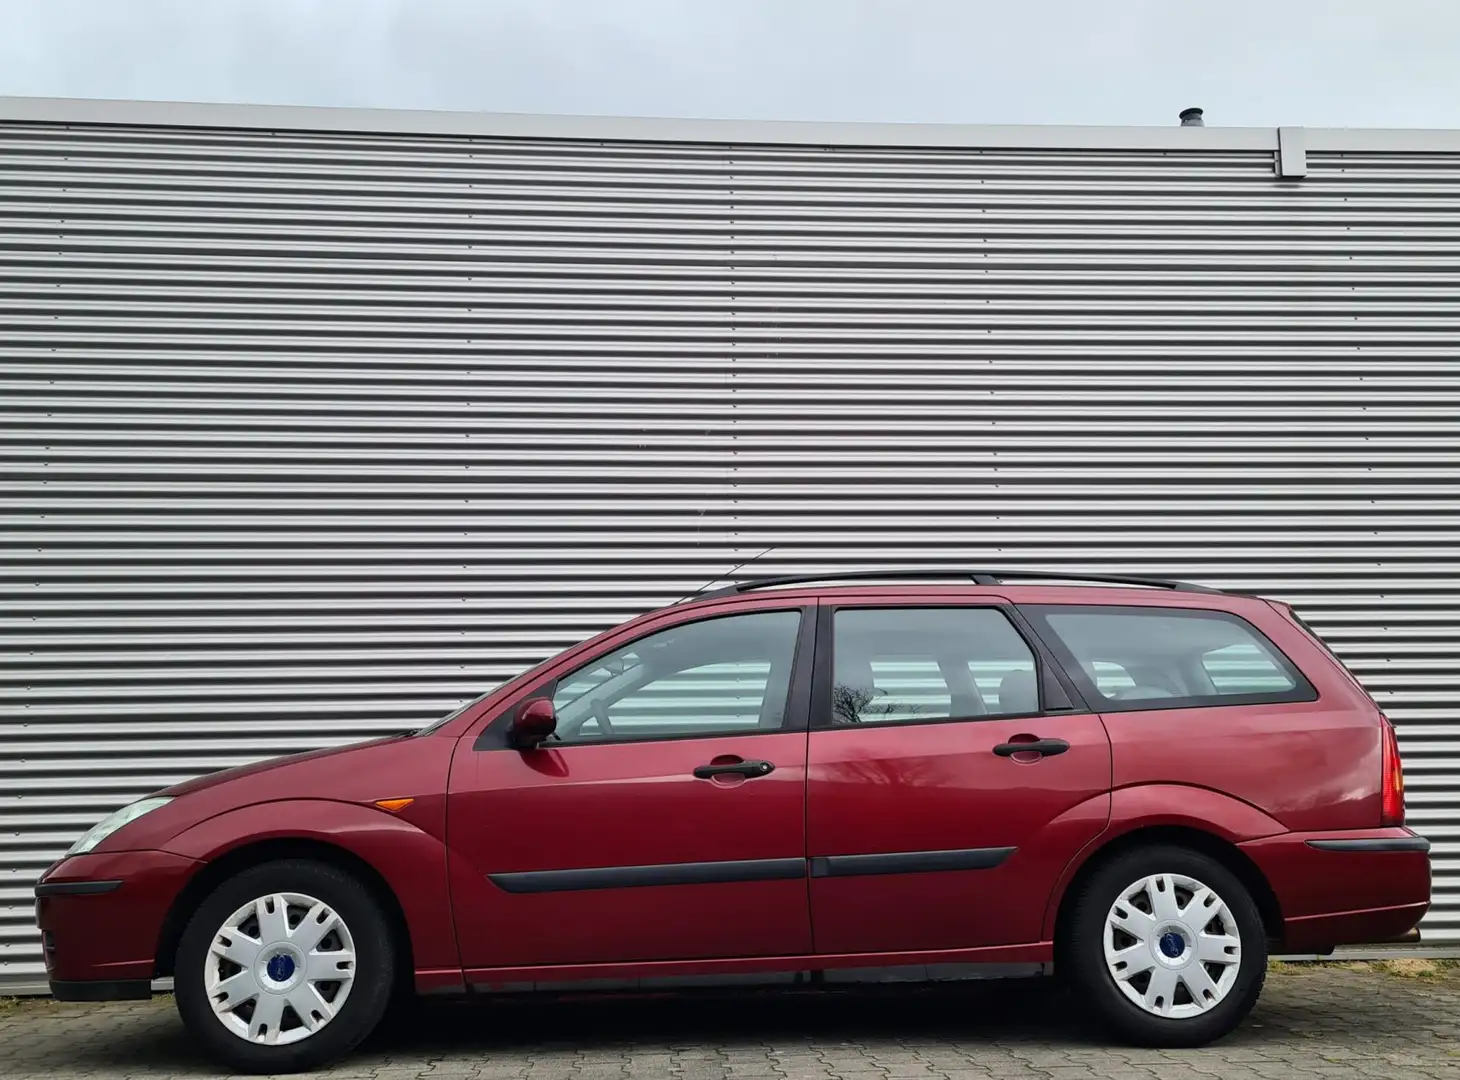 Ford Focus Wagon 1.6-16V Cool Edition 10-2002 Bordeaux Rood M Piros - 2